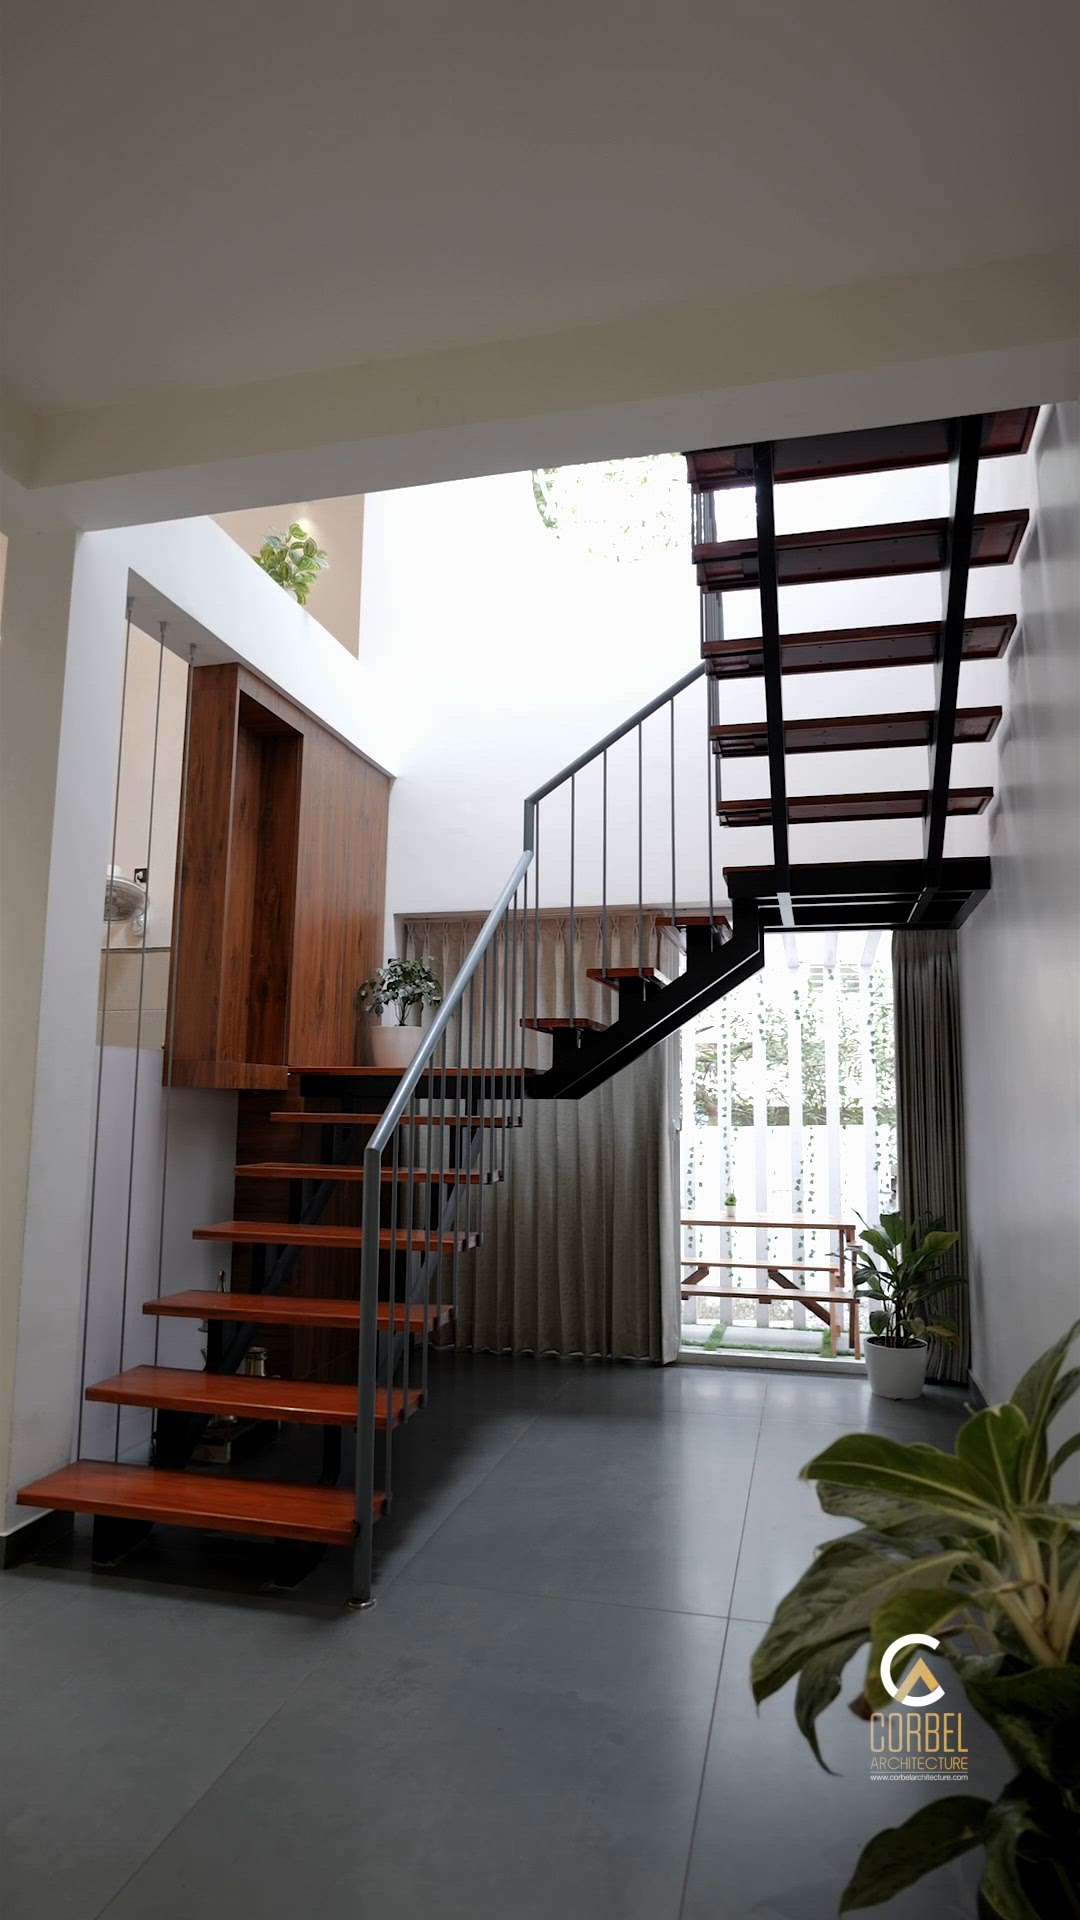 Staircase എങ്ങനെ മനോഹരമാക്കാം.

1935 sqft/3bhk/modern economical budget home
double storey/Kozhikode

Total Area: 2623
Bed Room: 4 bhk
Elevation Style: contemporary 
Location: odumbra,Kozhikode
Completed Year: 2023

Cost: 43 lakhs
Plot Size:5.36 cents

#corbel_constructions #corbelarchitecture #homedesigns #turnkey #turnkeycontractor #turnkeyconstruction #fullconstruction #planning #budgethomes